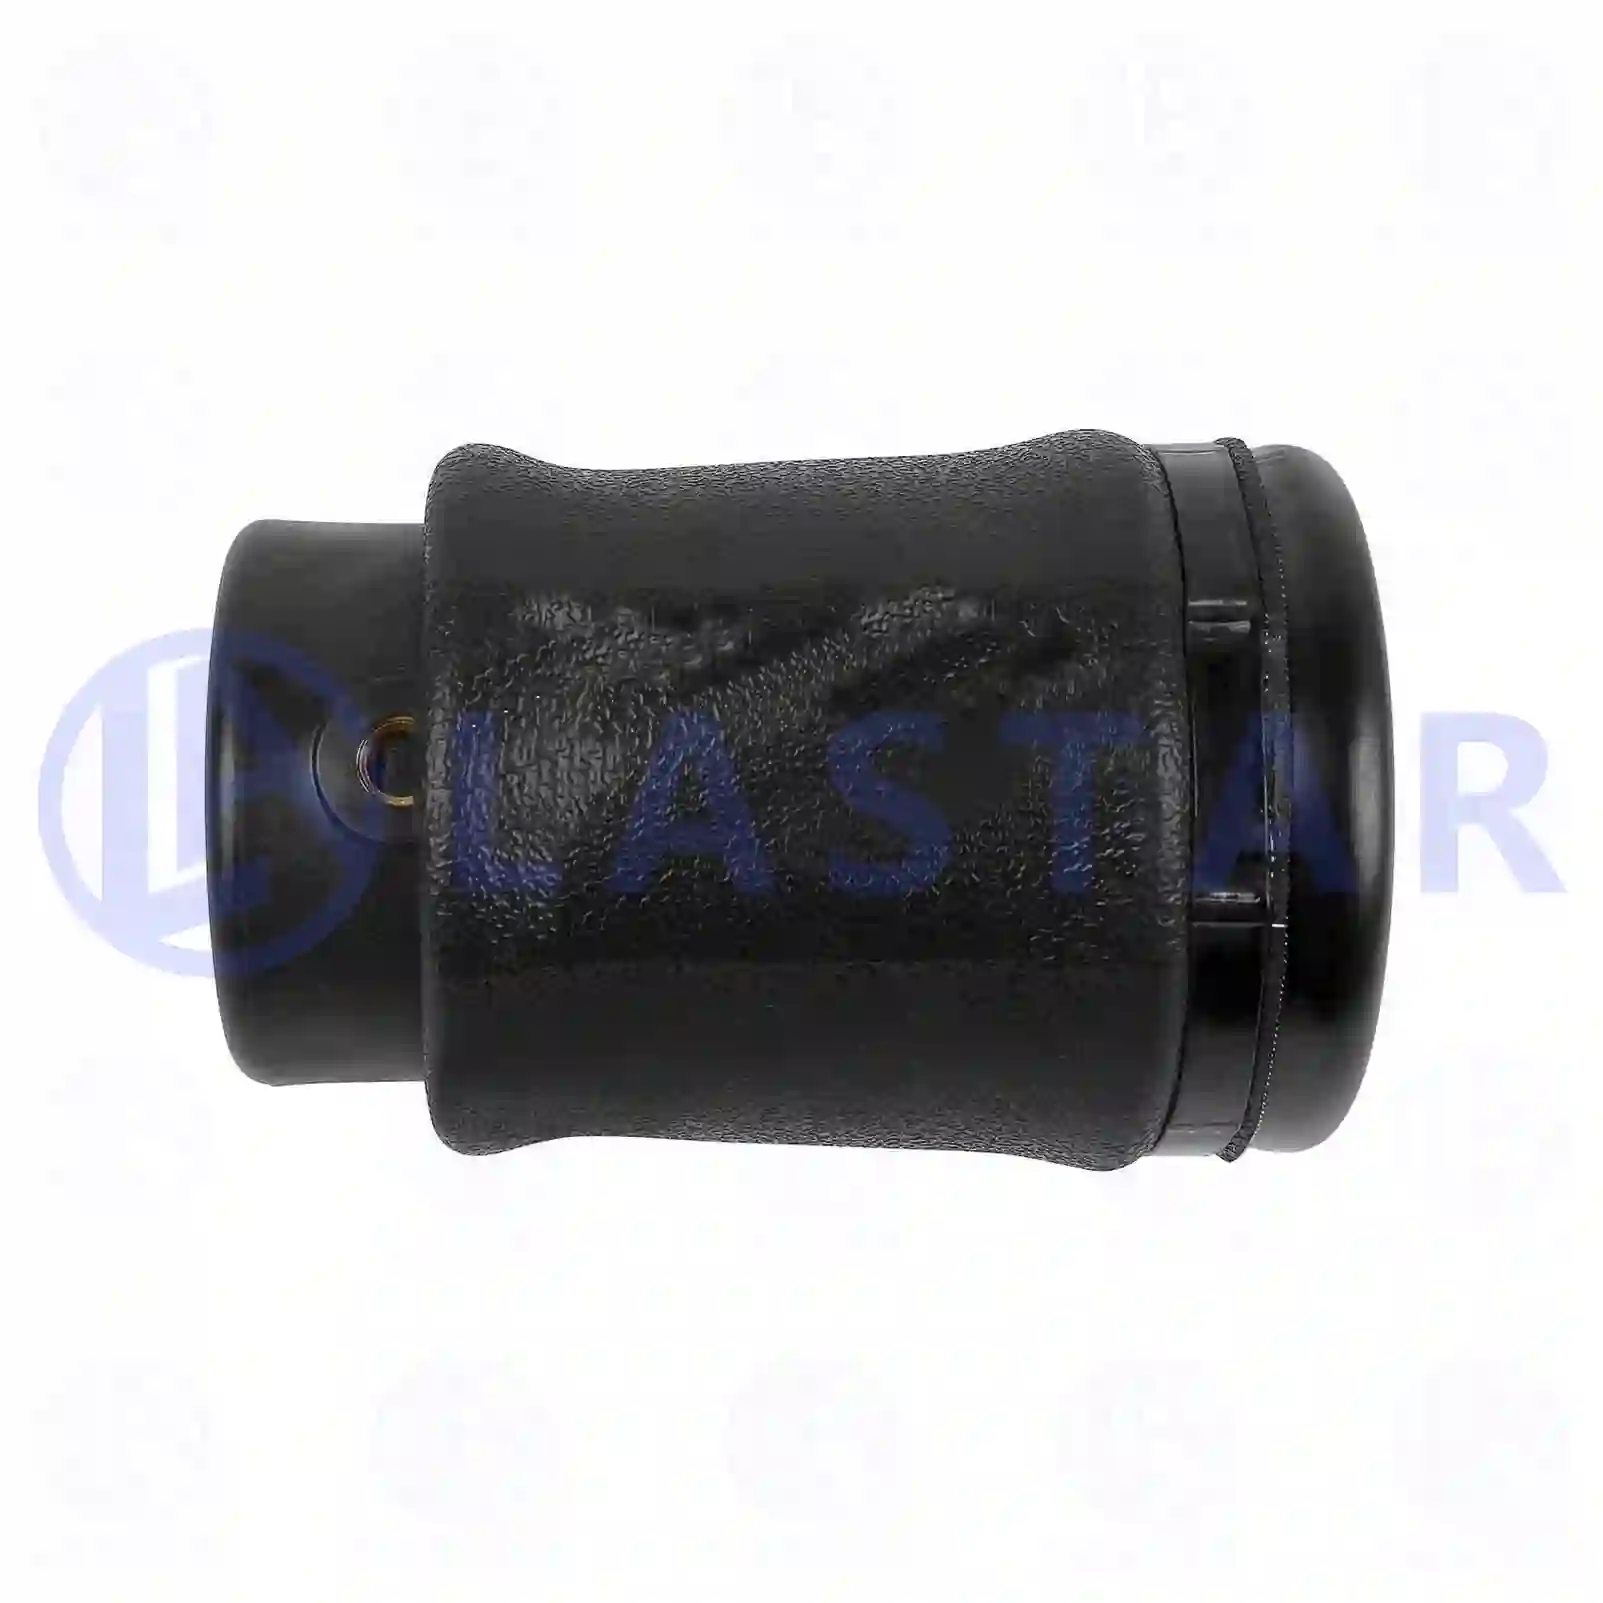 Air bellow, cabin shock absorber, 77735947, 1314278 ||  77735947 Lastar Spare Part | Truck Spare Parts, Auotomotive Spare Parts Air bellow, cabin shock absorber, 77735947, 1314278 ||  77735947 Lastar Spare Part | Truck Spare Parts, Auotomotive Spare Parts